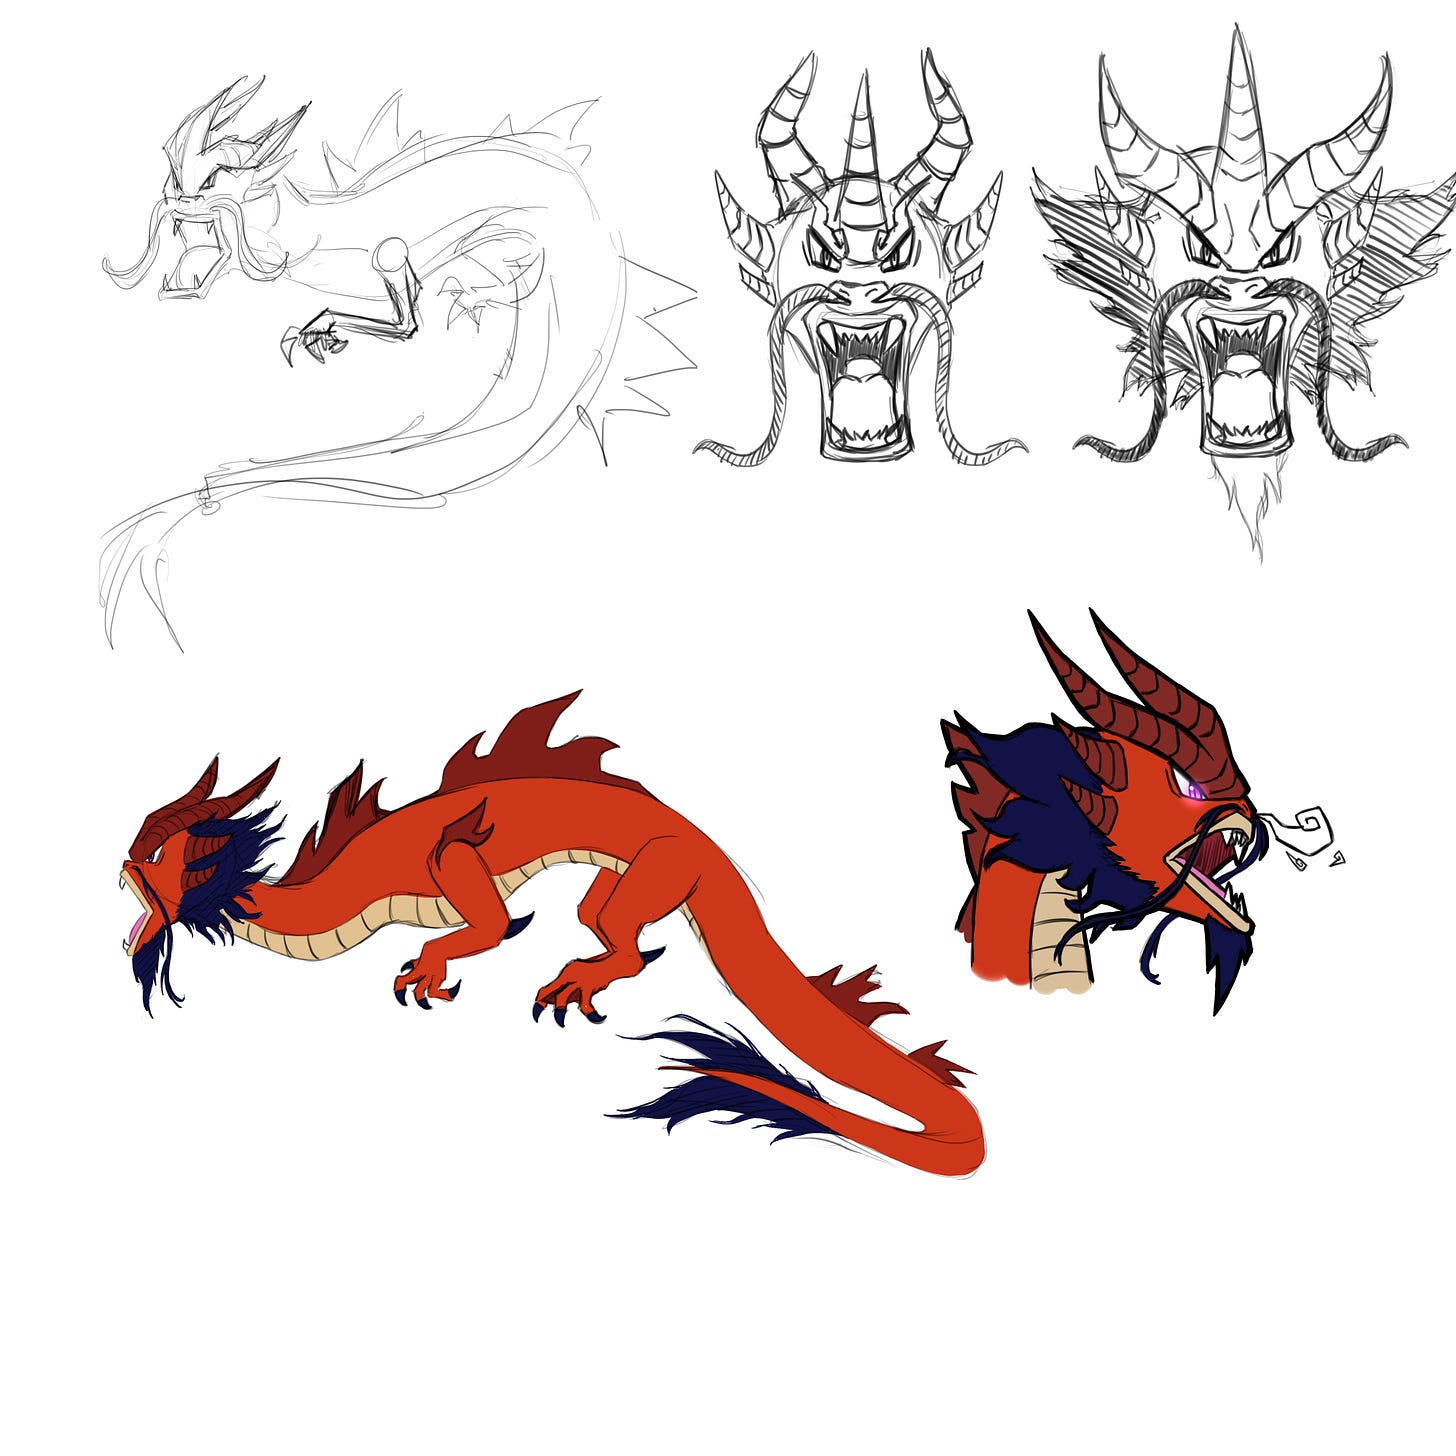 Early sketches of Vermilion Calamity, including a full version showing the entire Pokémon (Artist: Glaedrax)